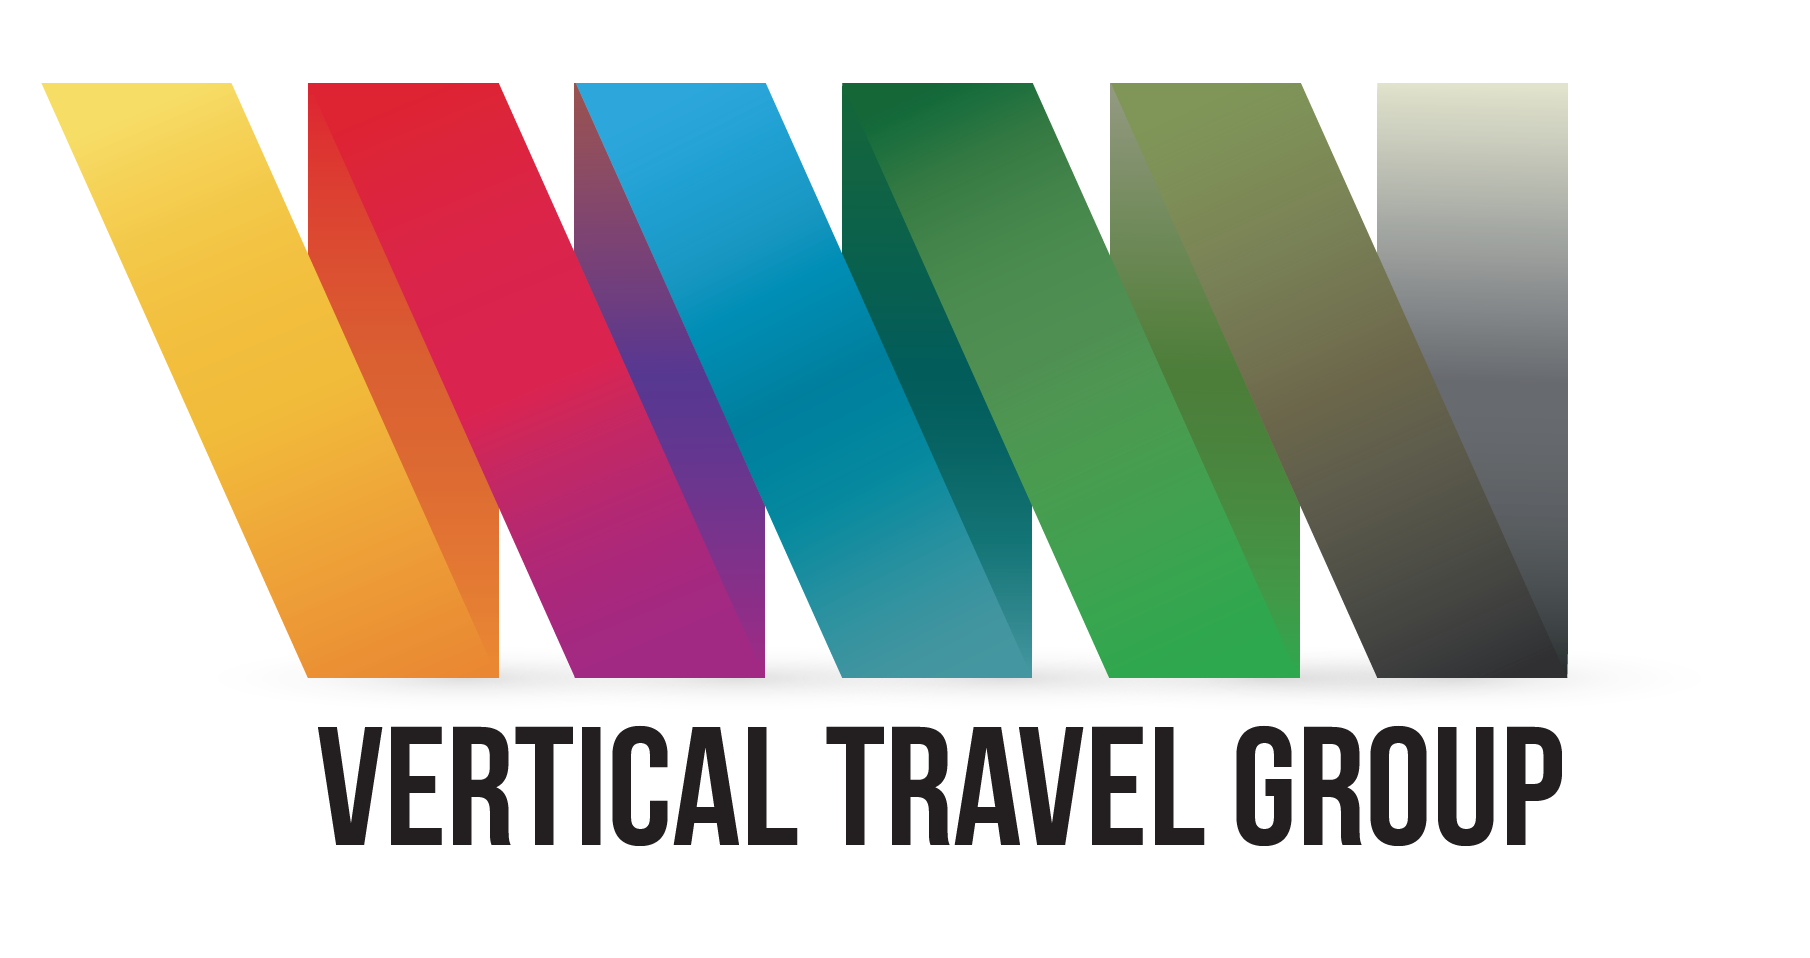 Vertical Travel Group